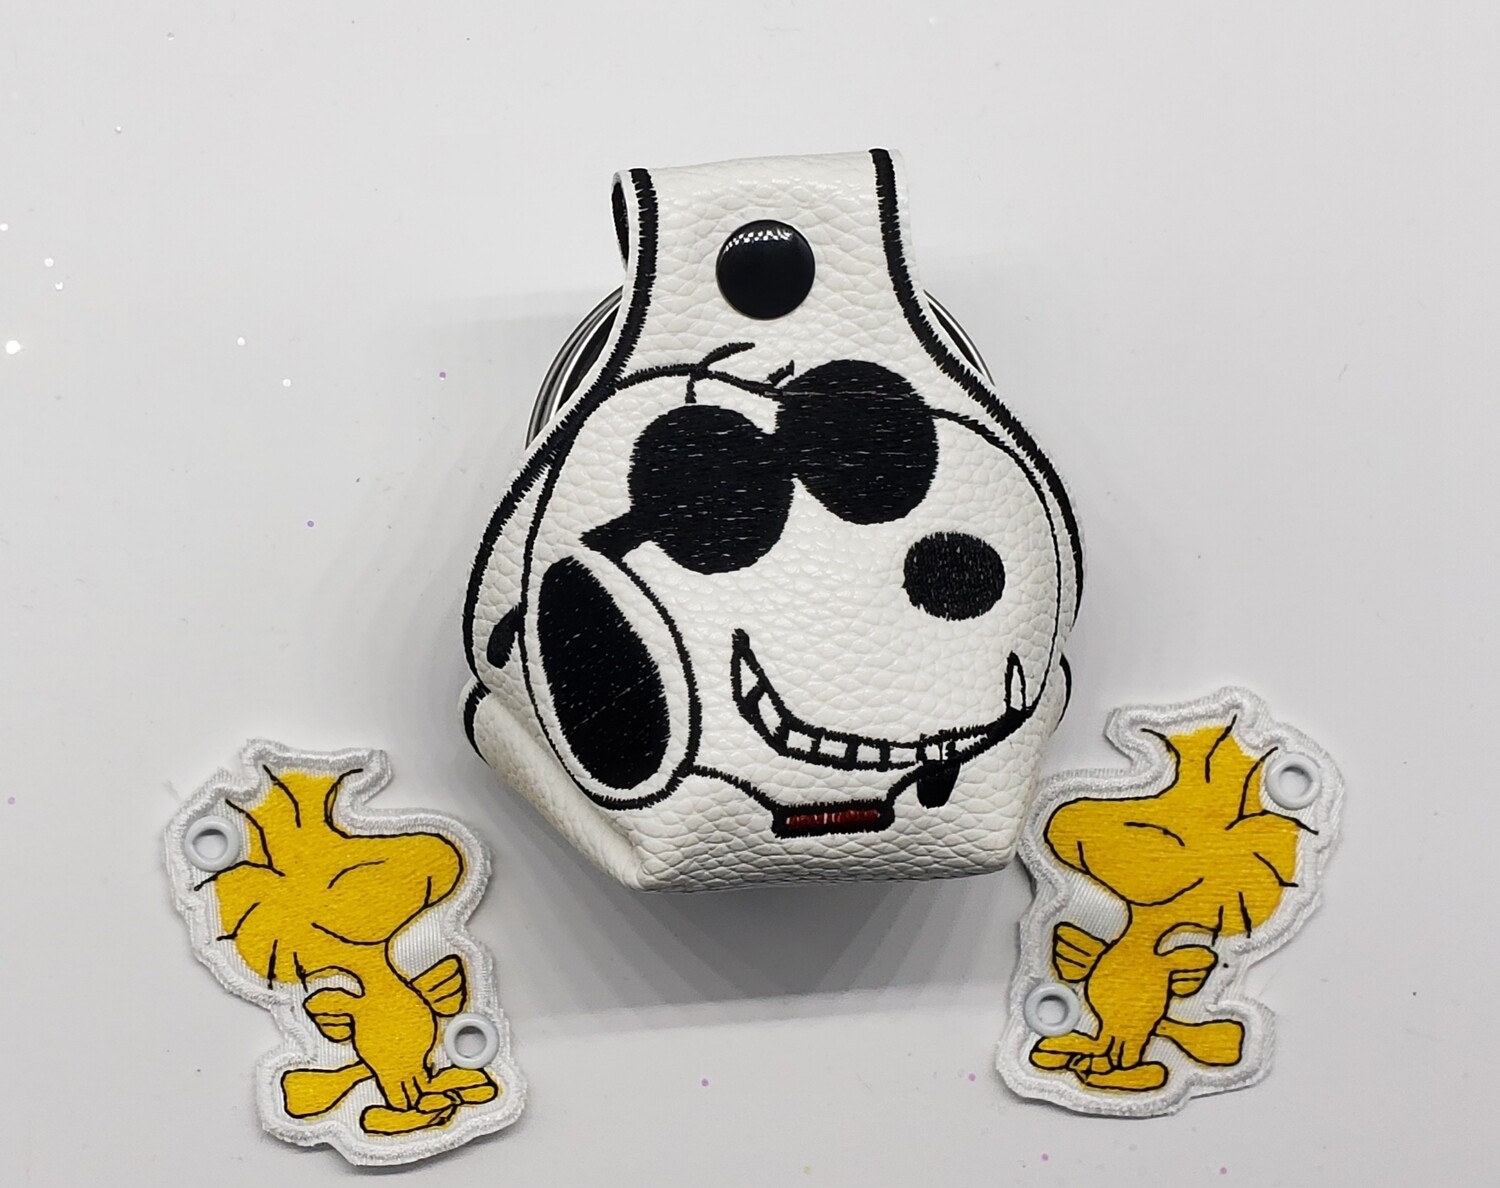 custom order of snoopy character toe guards